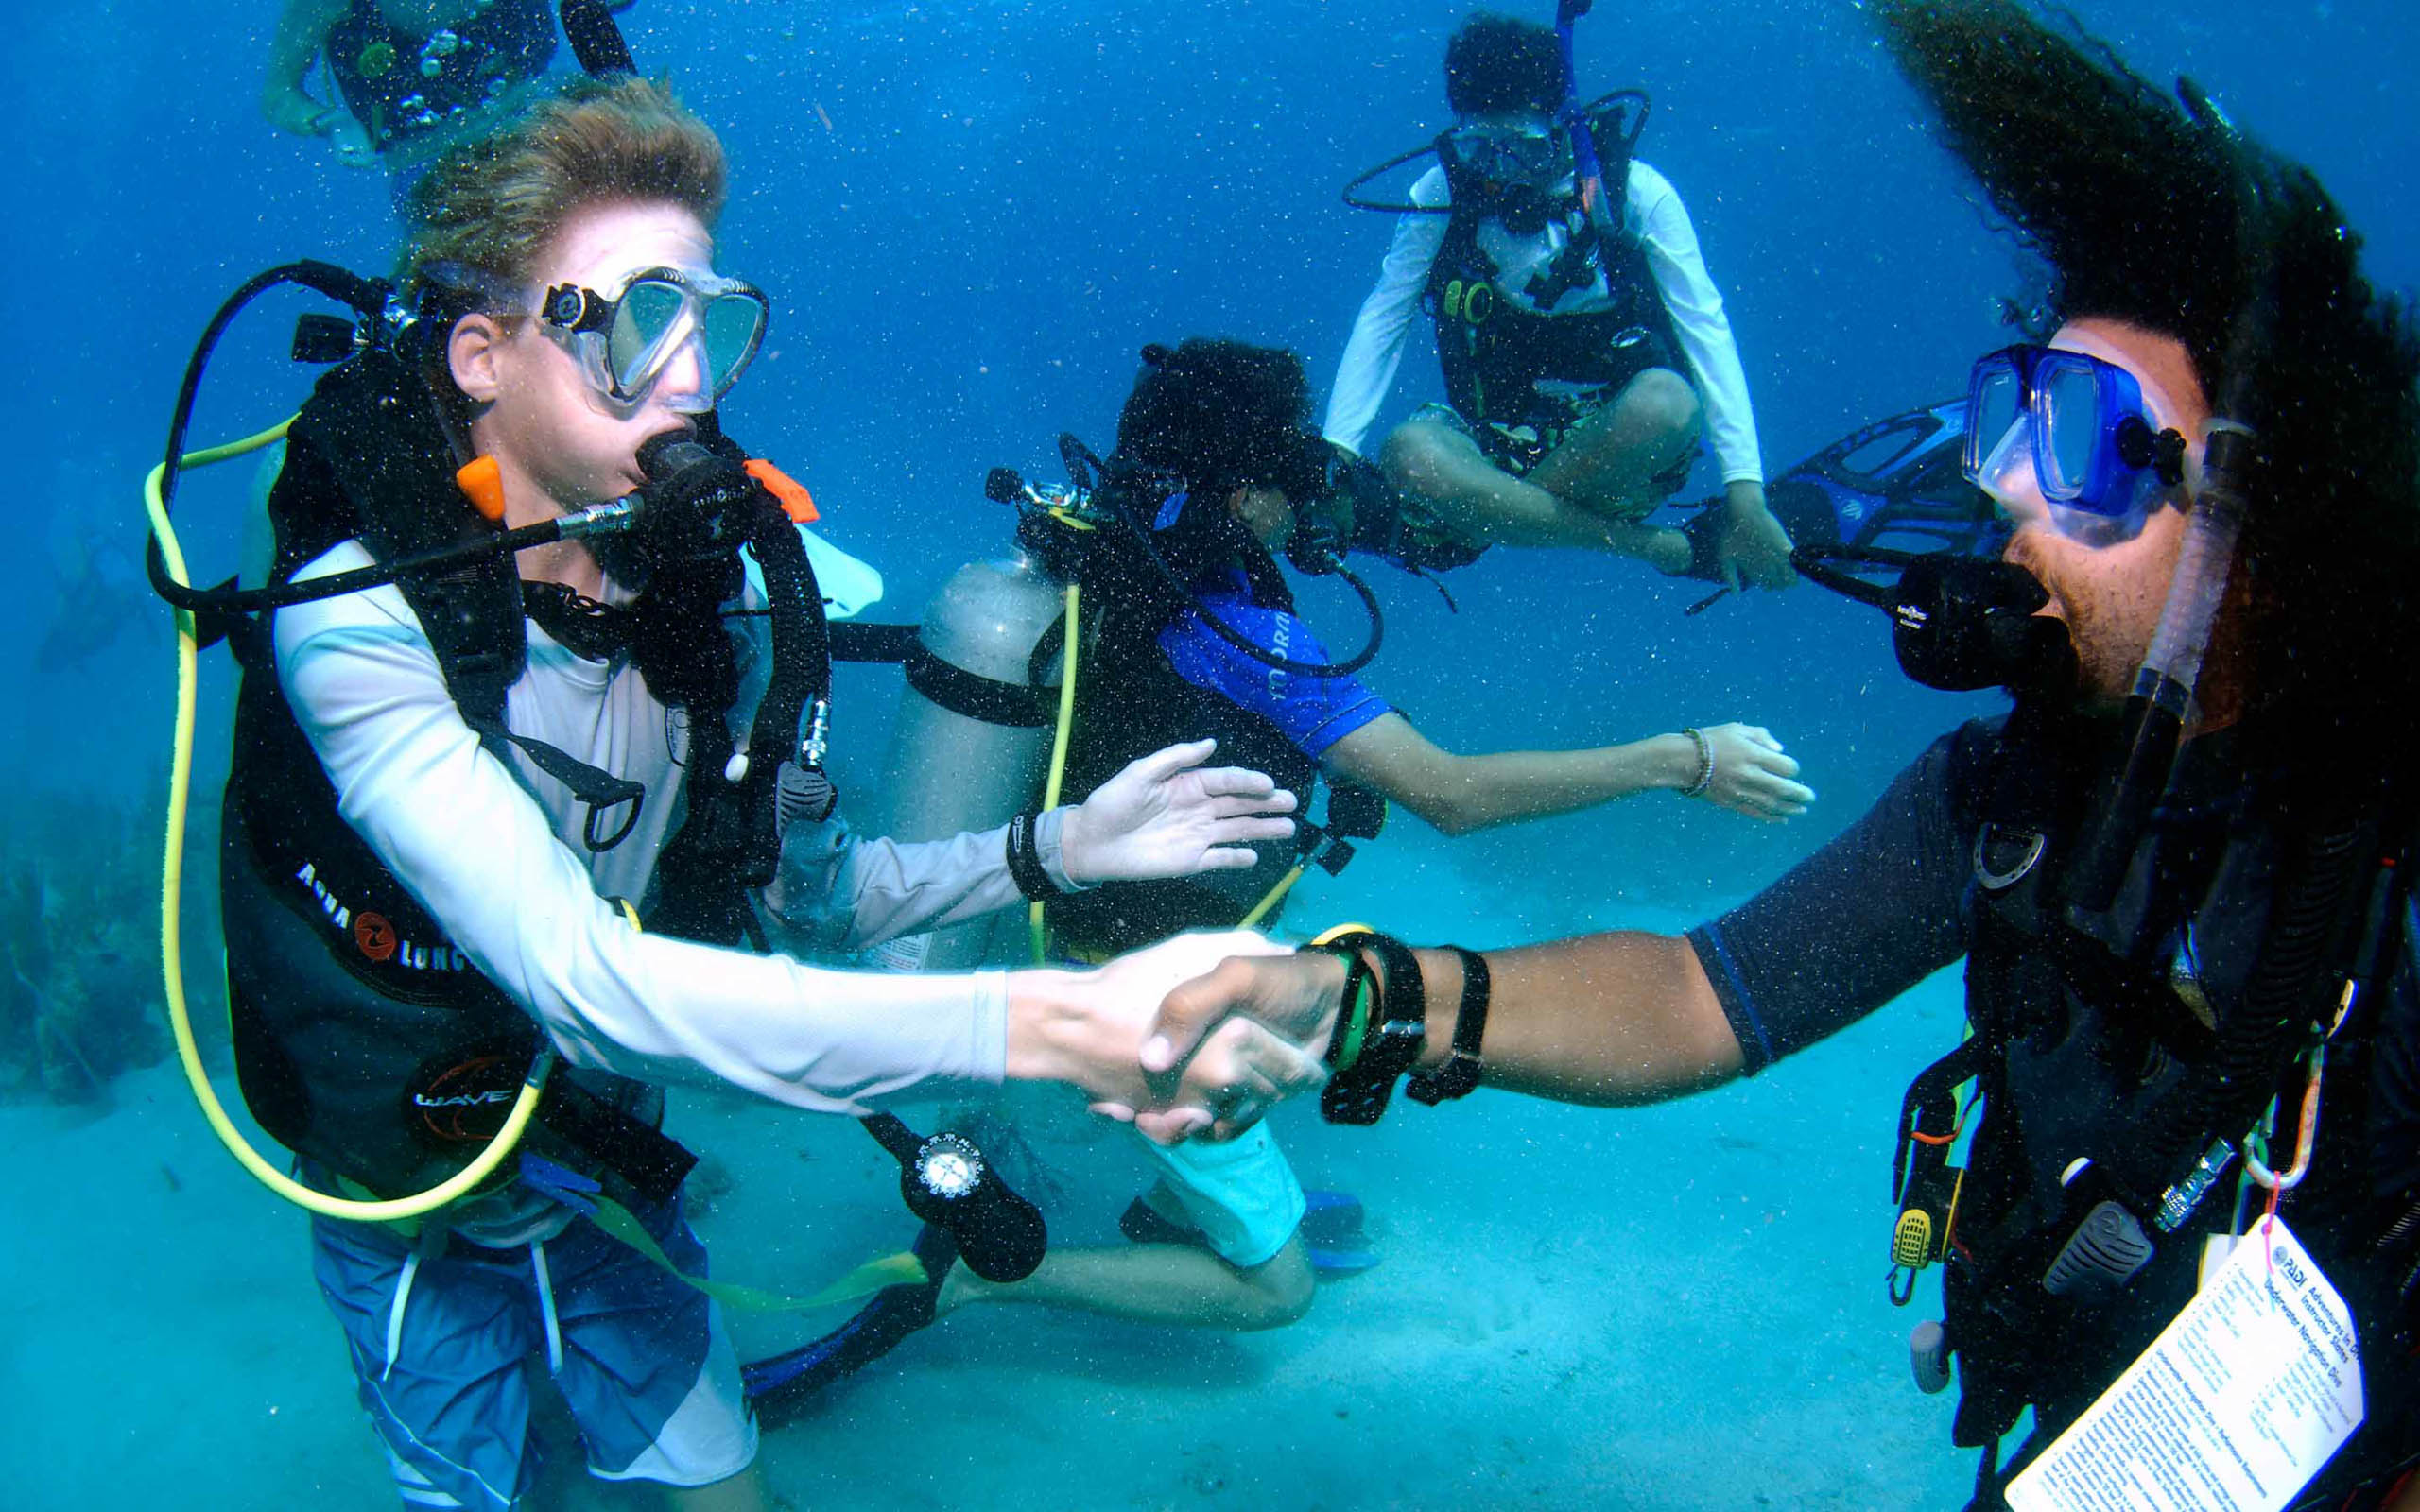 A group of people scuba diving in the ocean.